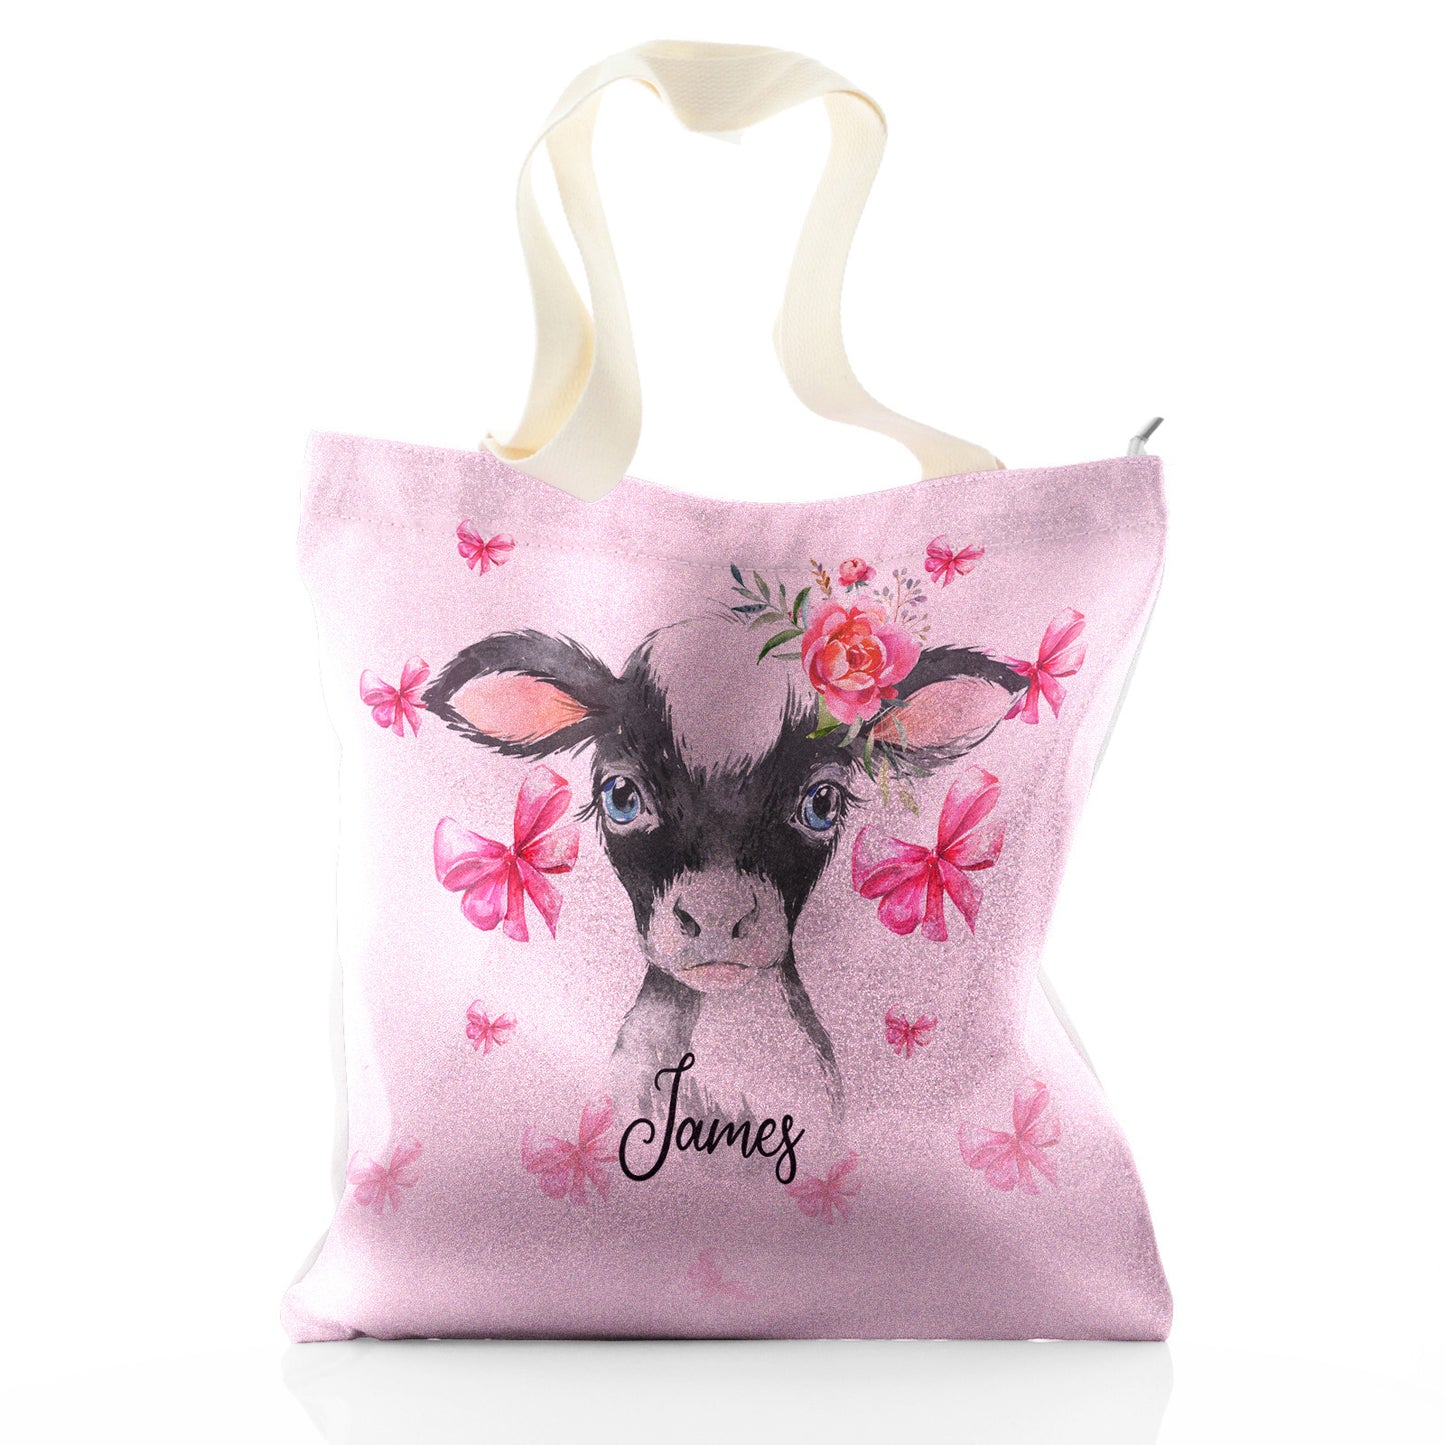 Personalised Glitter Tote Bag with Cow Pink Bows and Cute Text